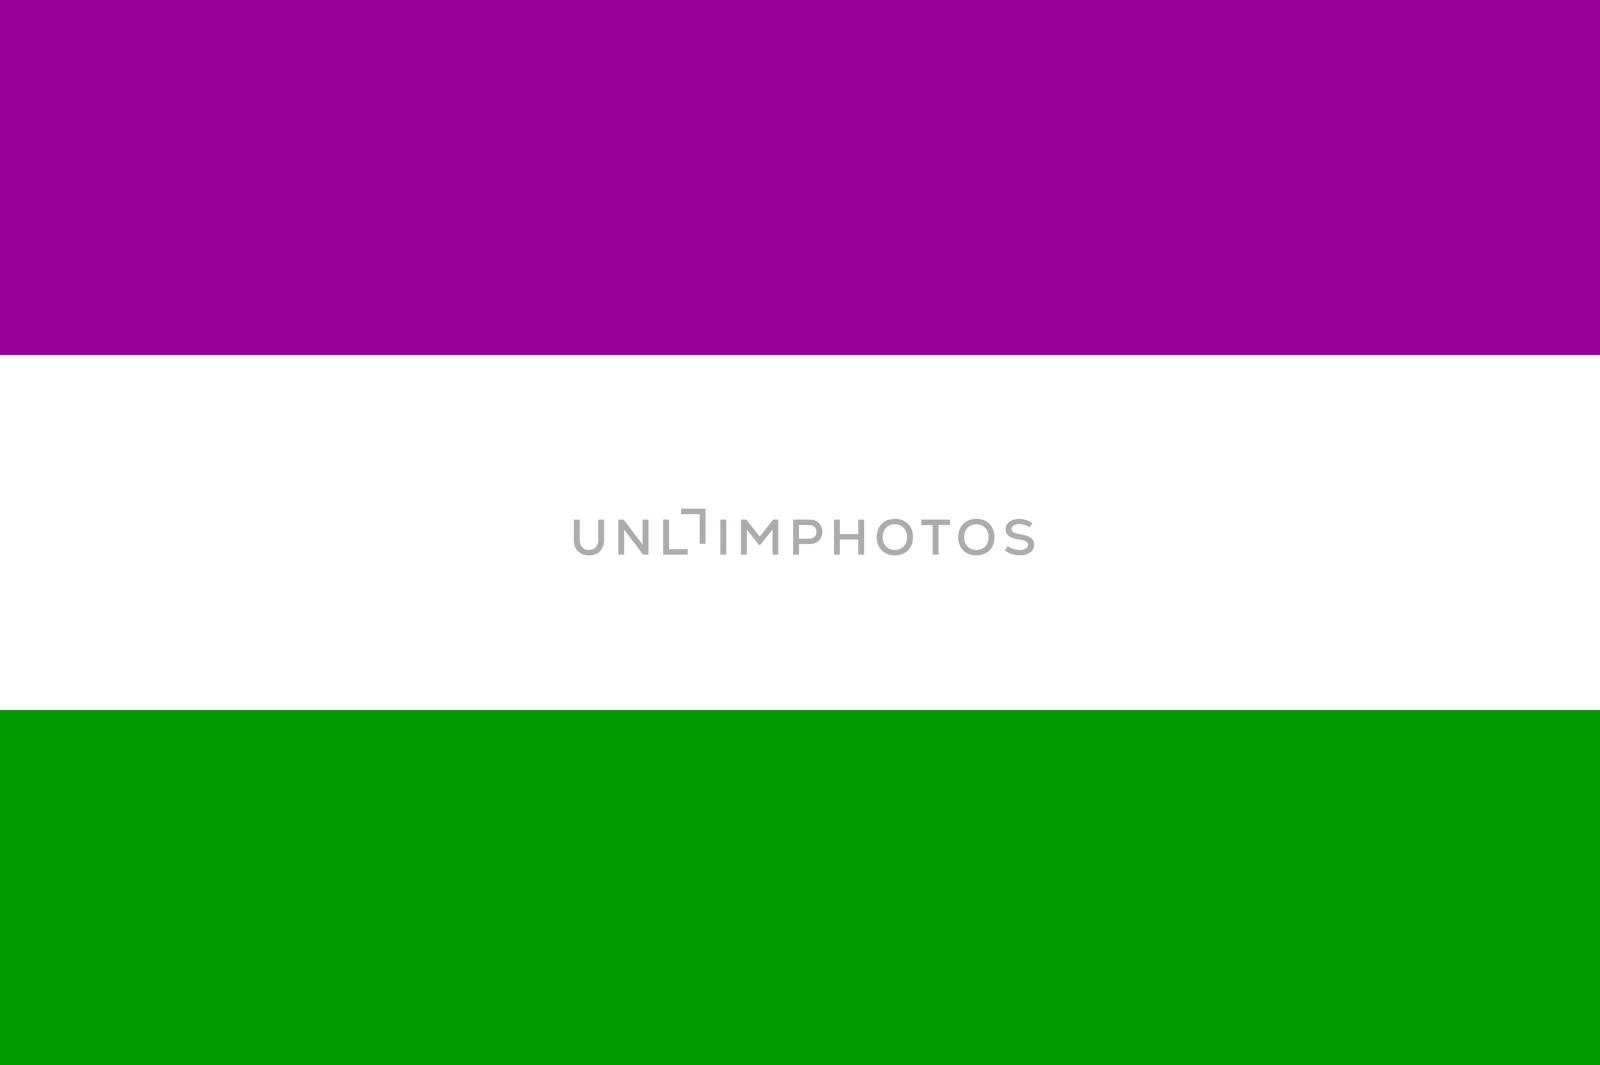 united states of america Suffragette flag hisorical symbol